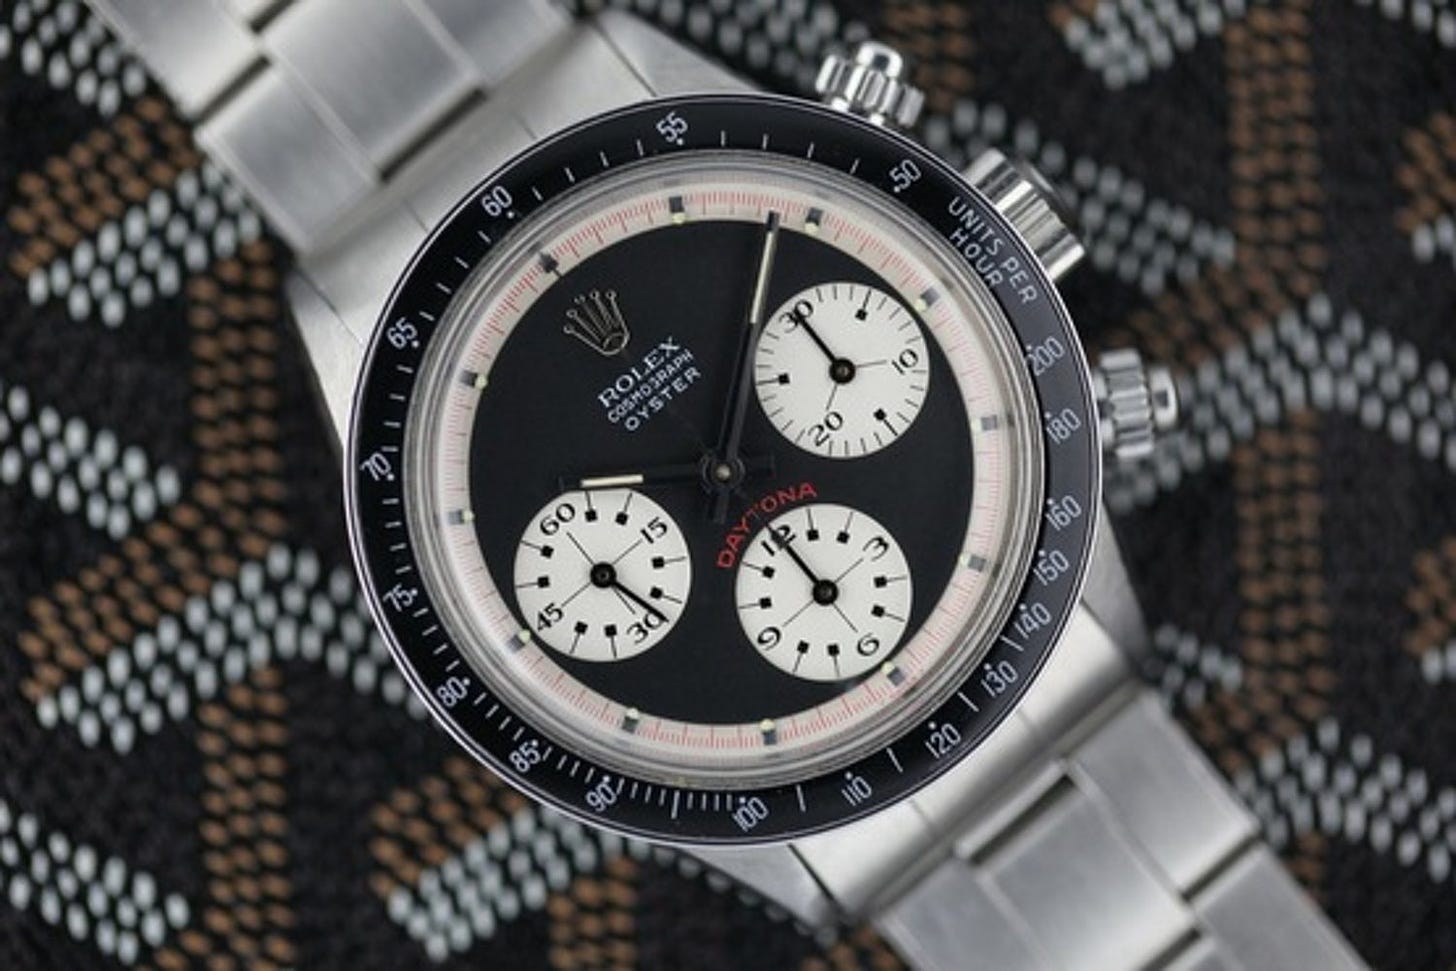 Hands-On: So, What's The Deal With The Rolex Daytona 6240 Solo? - Hodinkee